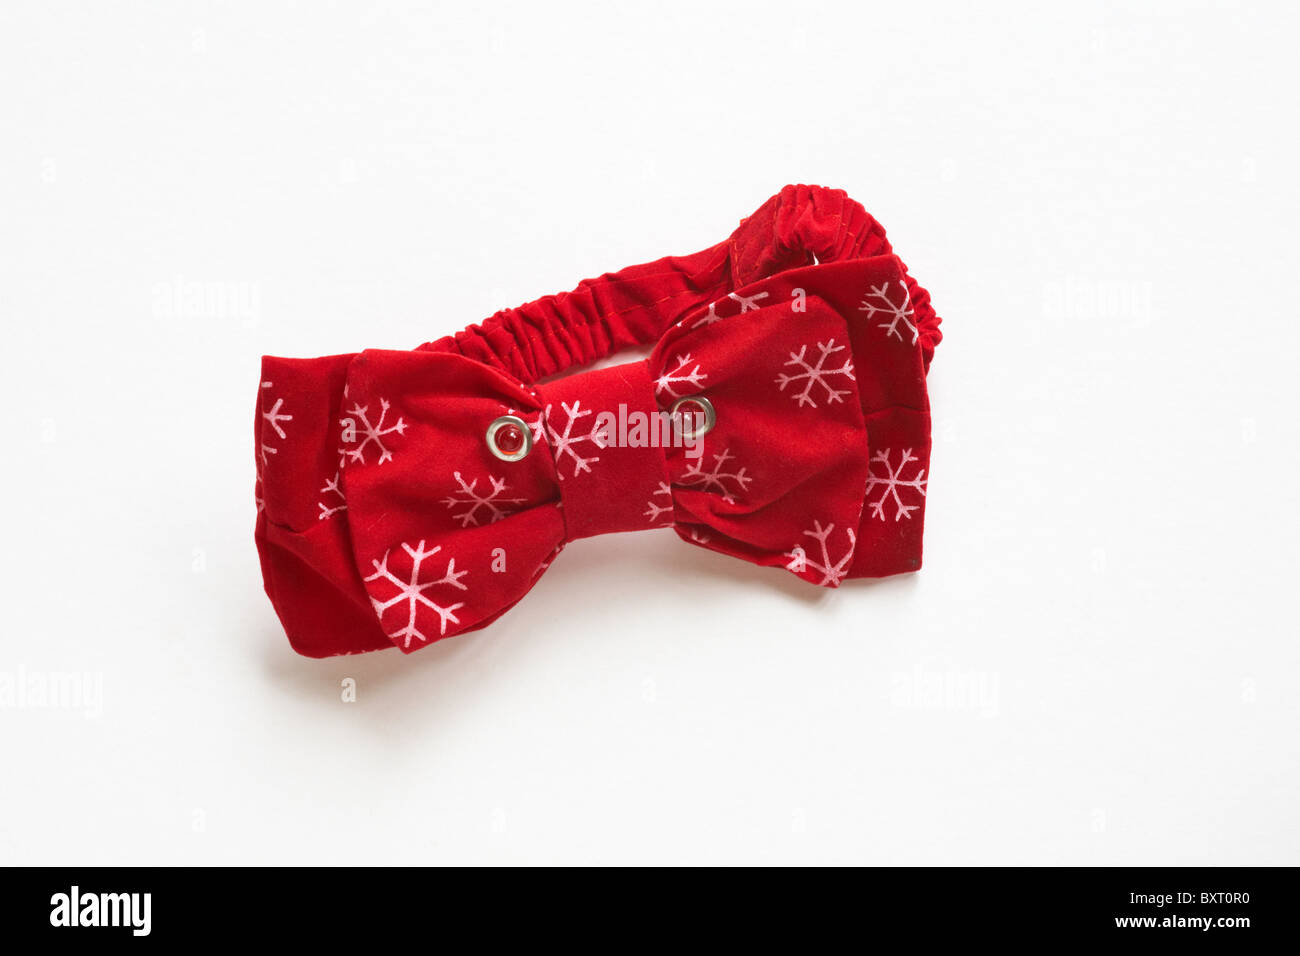 Novelty Christmas bow tie with flashing lights isolated on white background Stock Photo